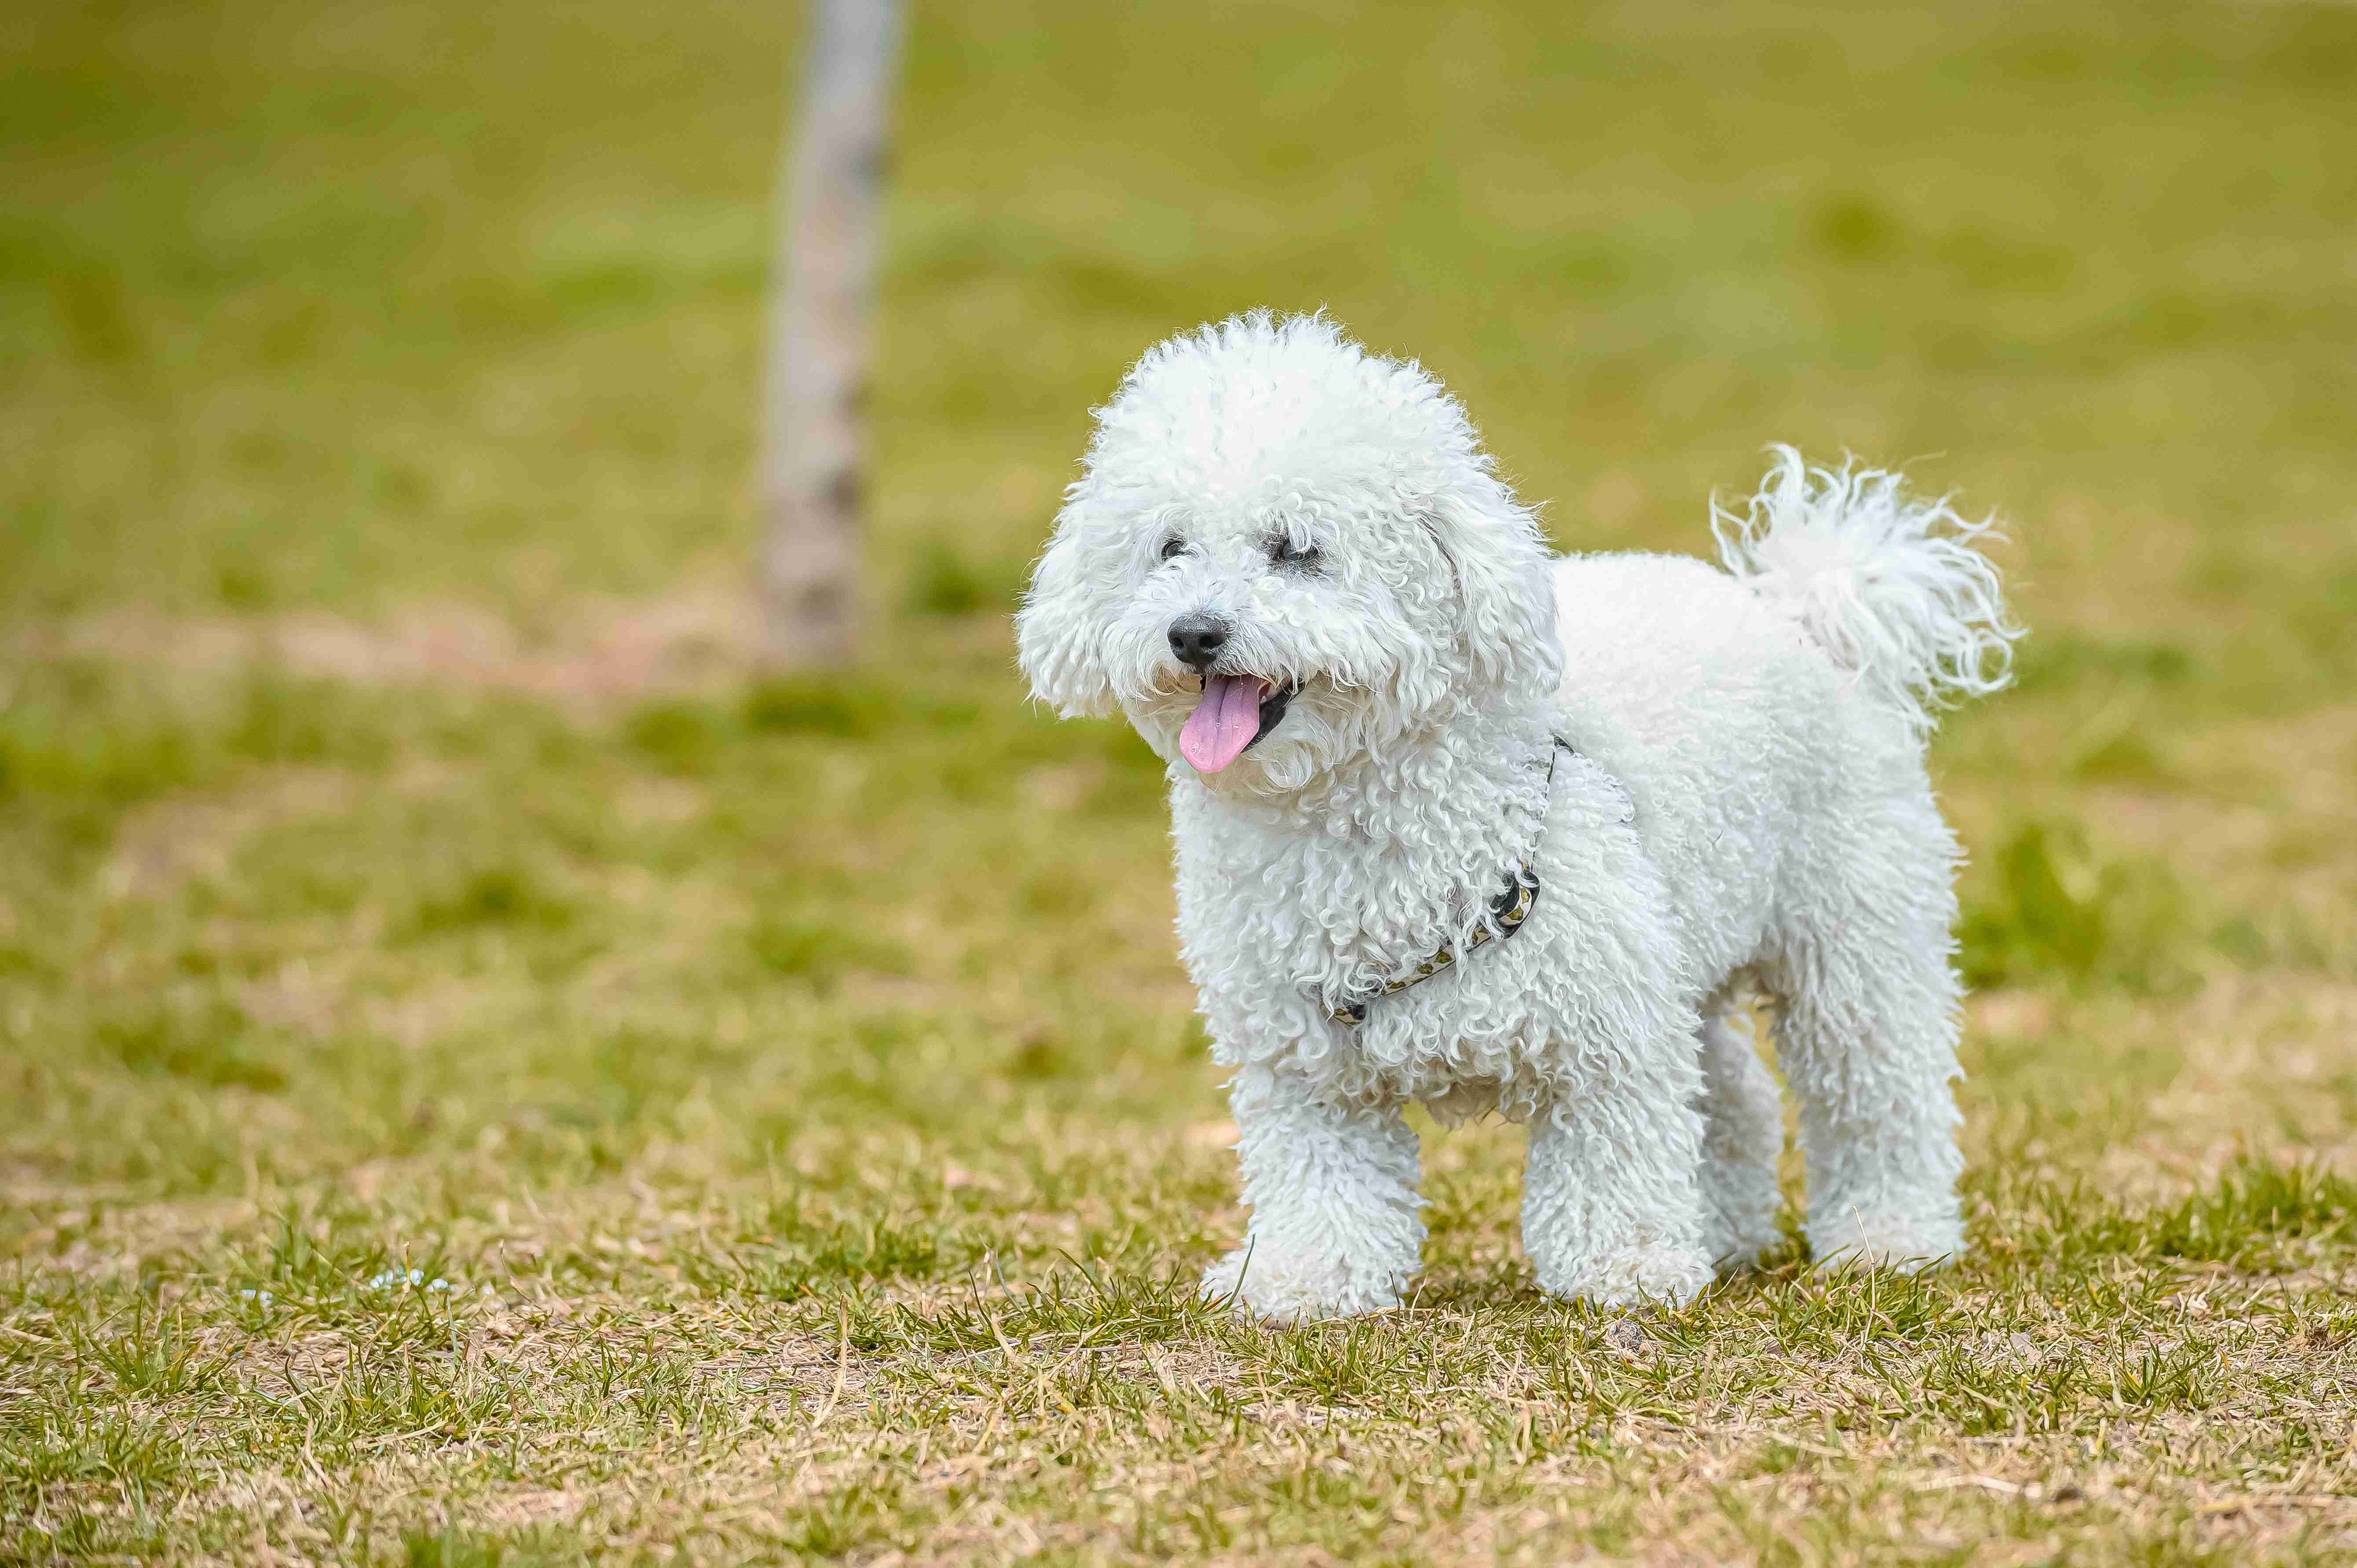 Are Poodles more prone to allergies compared to other dog breeds?